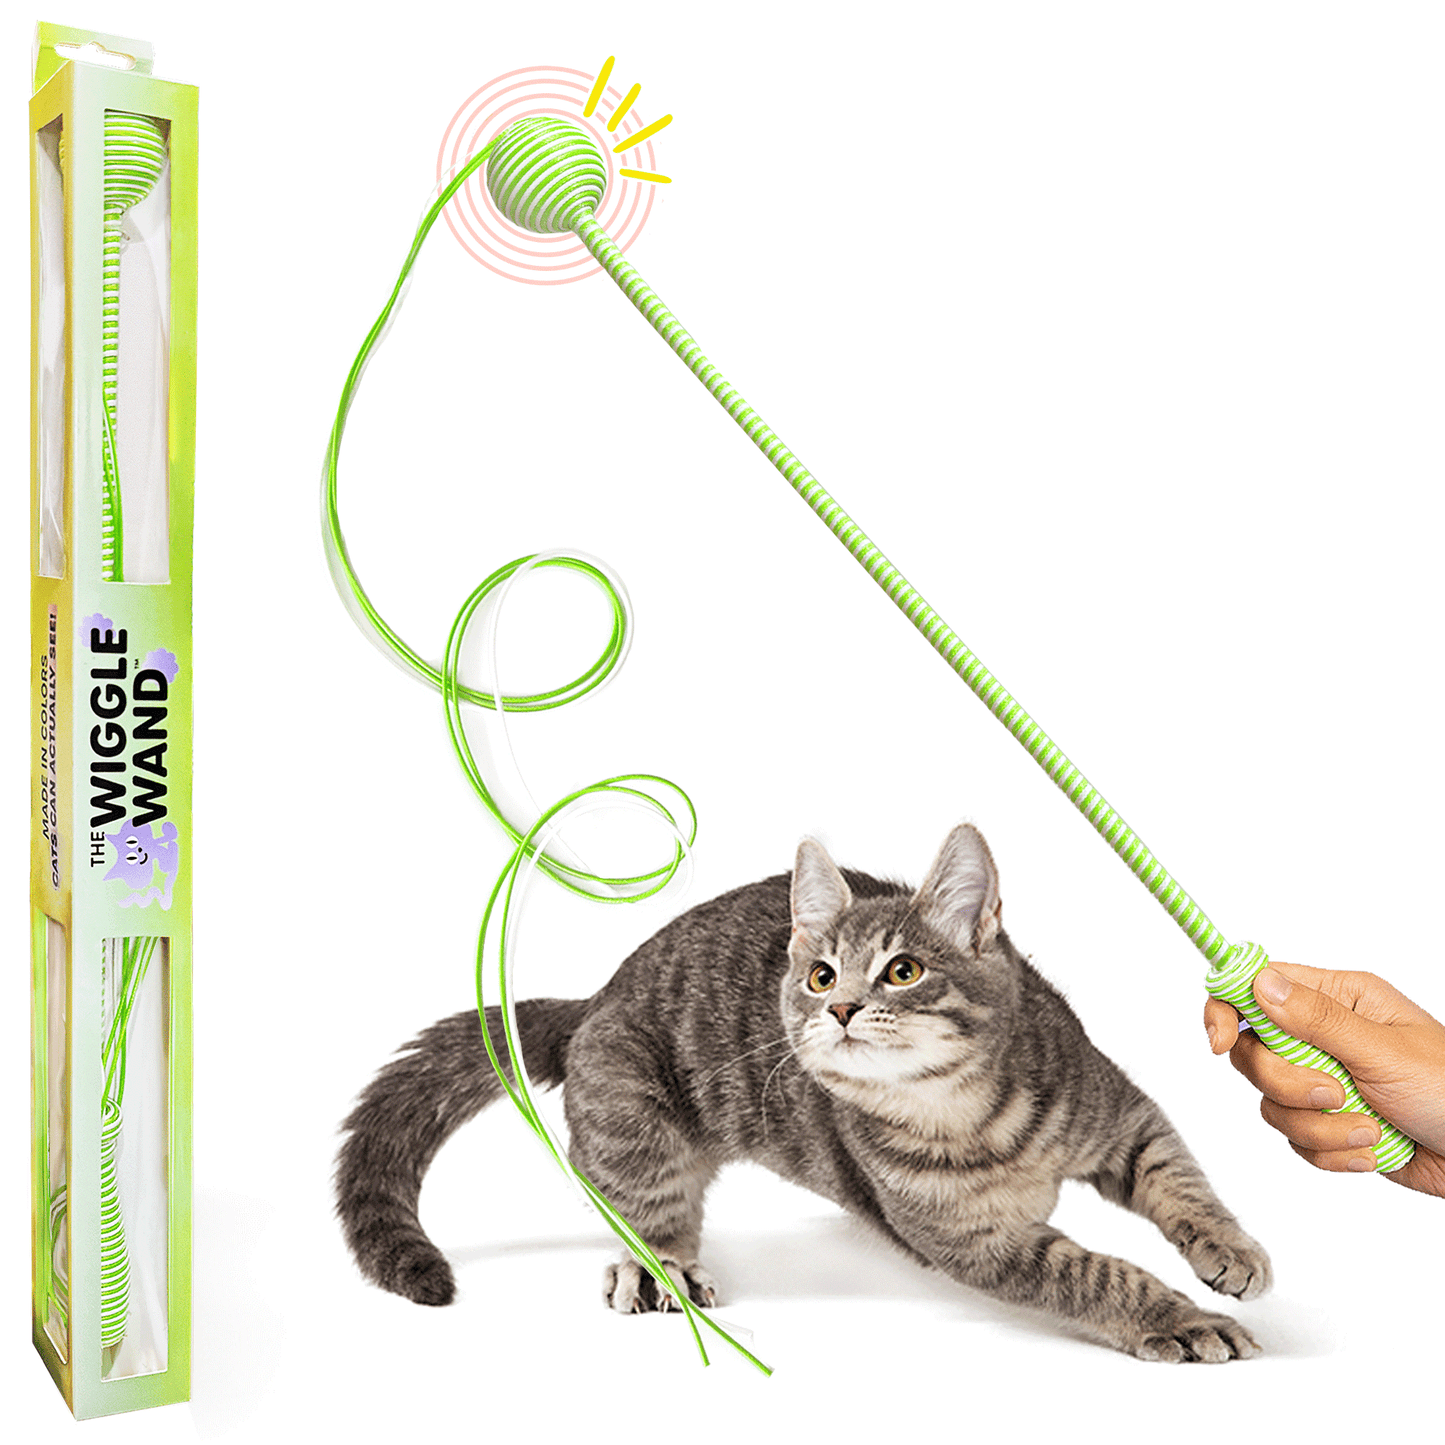 Green Wiggle Wand™ interactive cat toy stimulating play and exercise for cats.